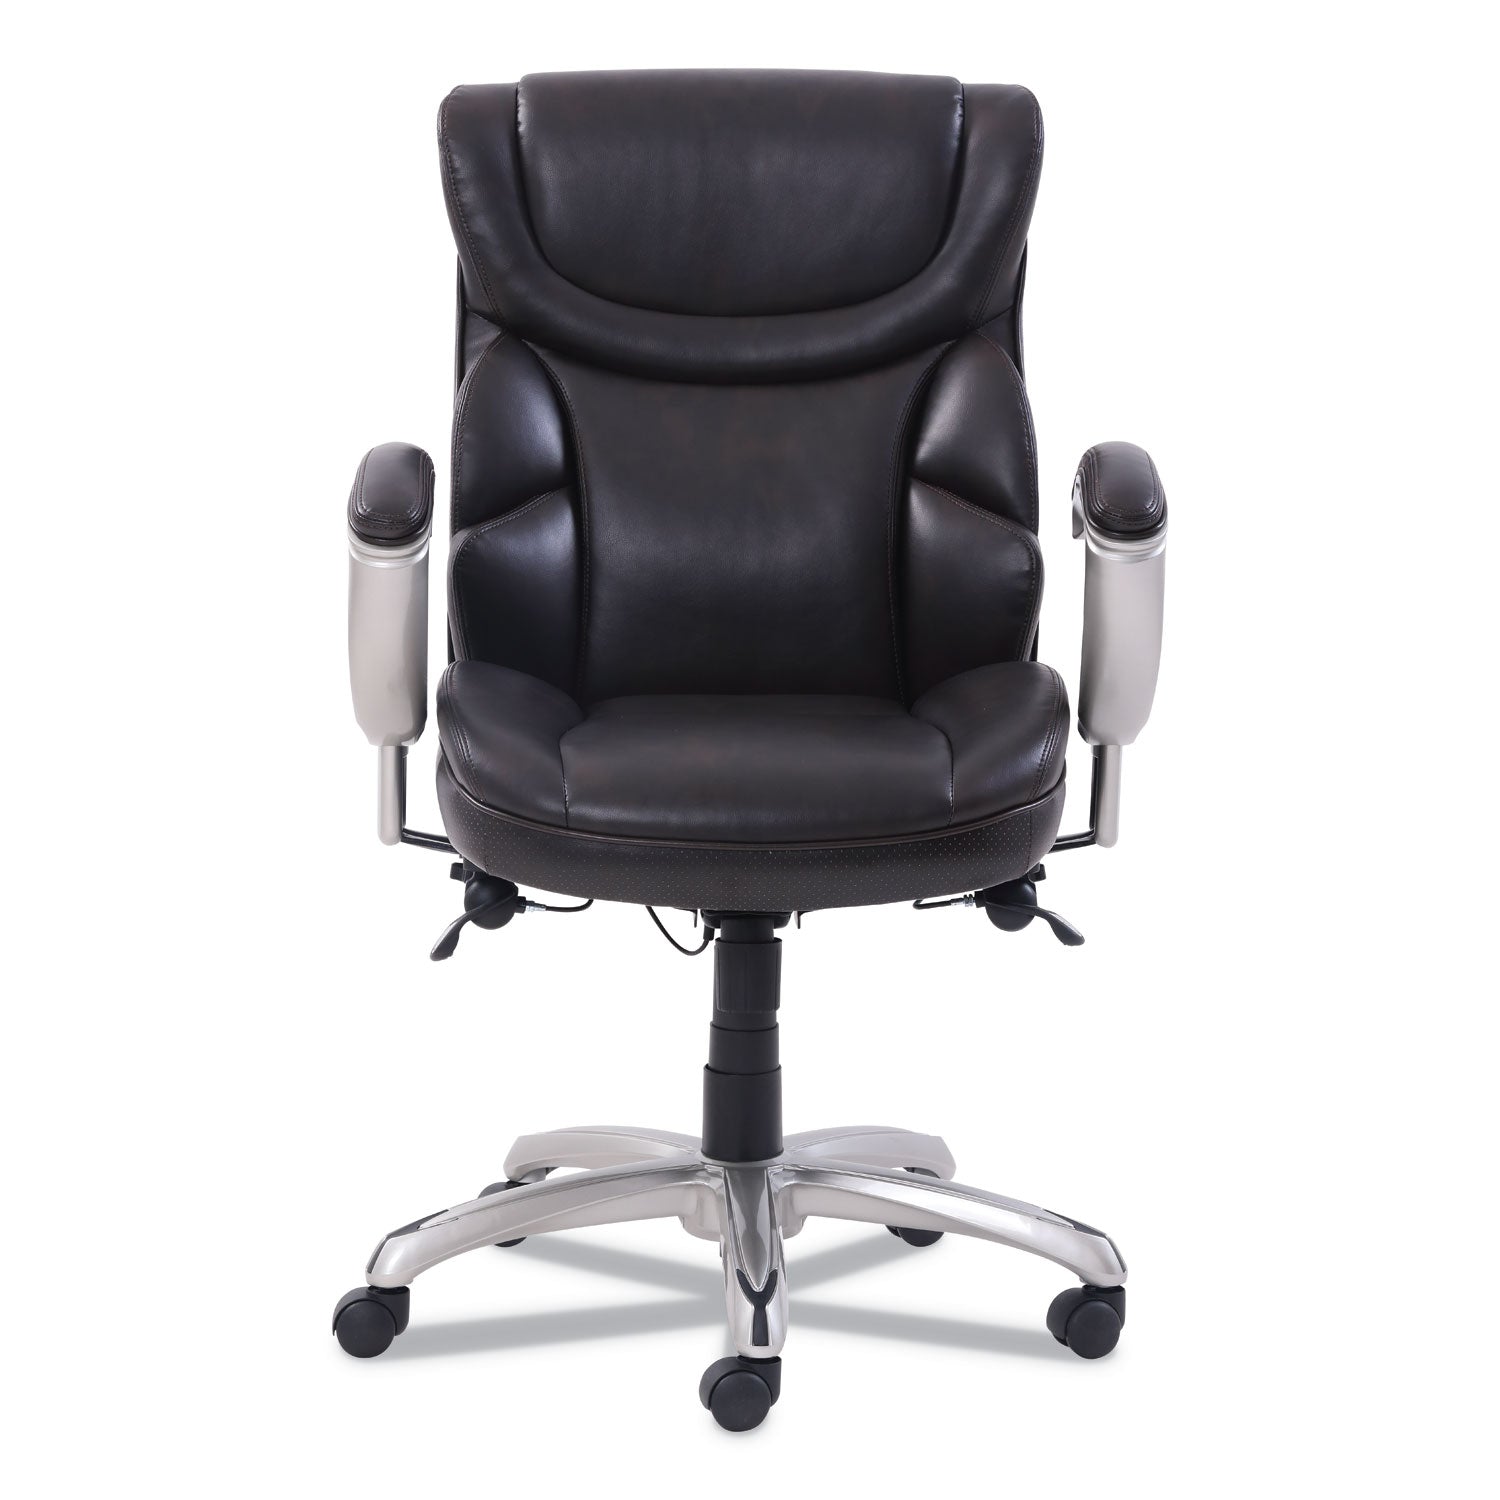 emerson-task-chair-supports-up-to-300-lb-1875-to-2175-seat-height-brown-seat-back-silver-base_srj49711brw - 2